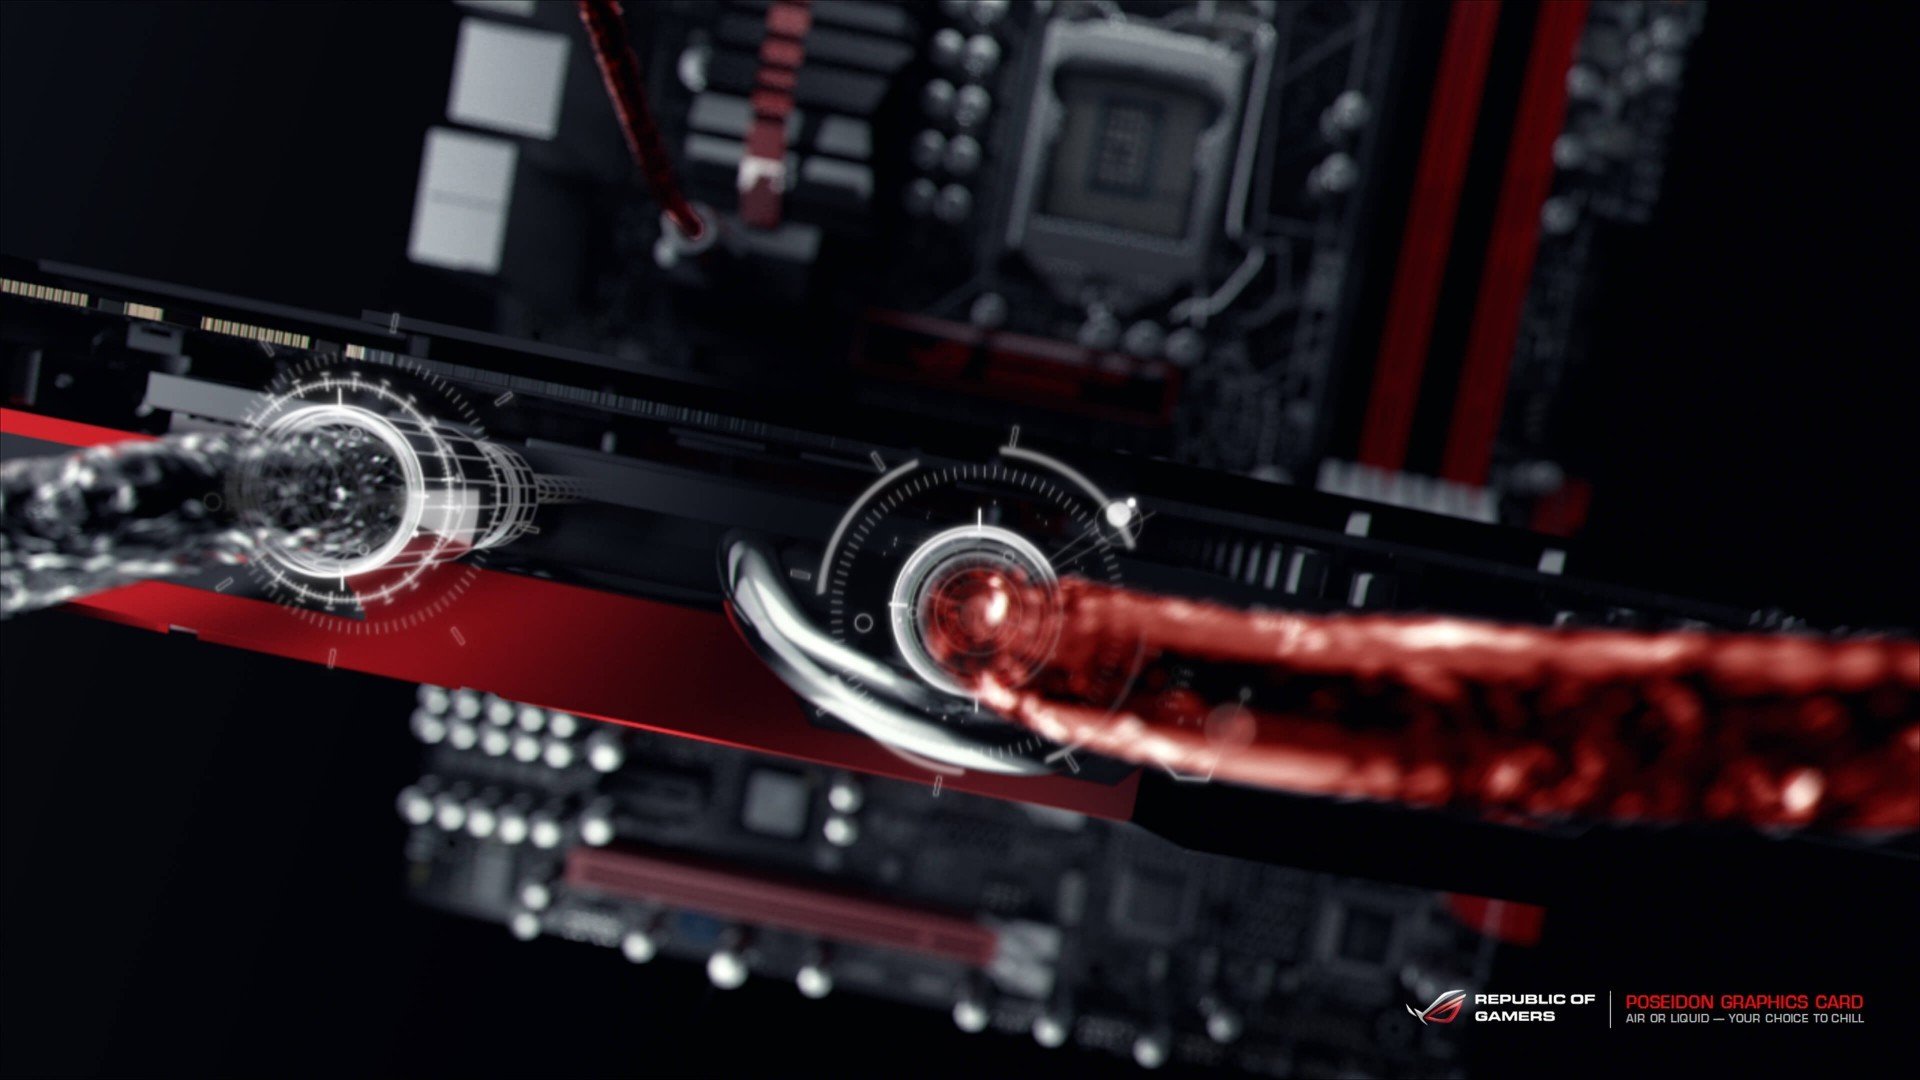 ASUS, ASUS ROG, Liquid, Cooling fan, Technology, PC gaming, Water cooling Wallpaper